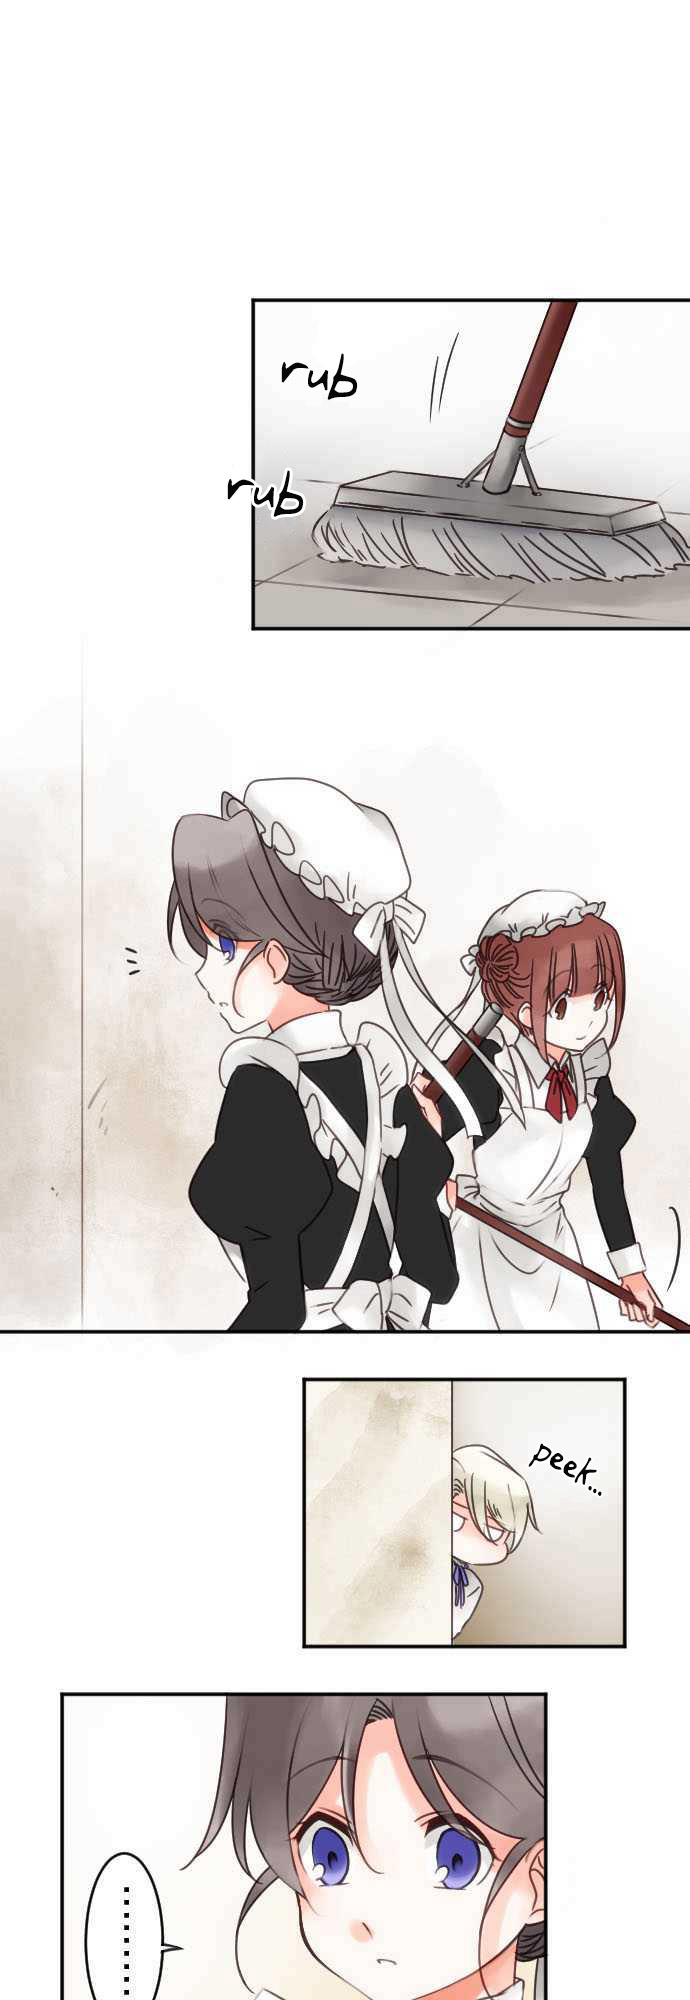 Bocchan to Maid Ch. 38 Sweetness in Moderation